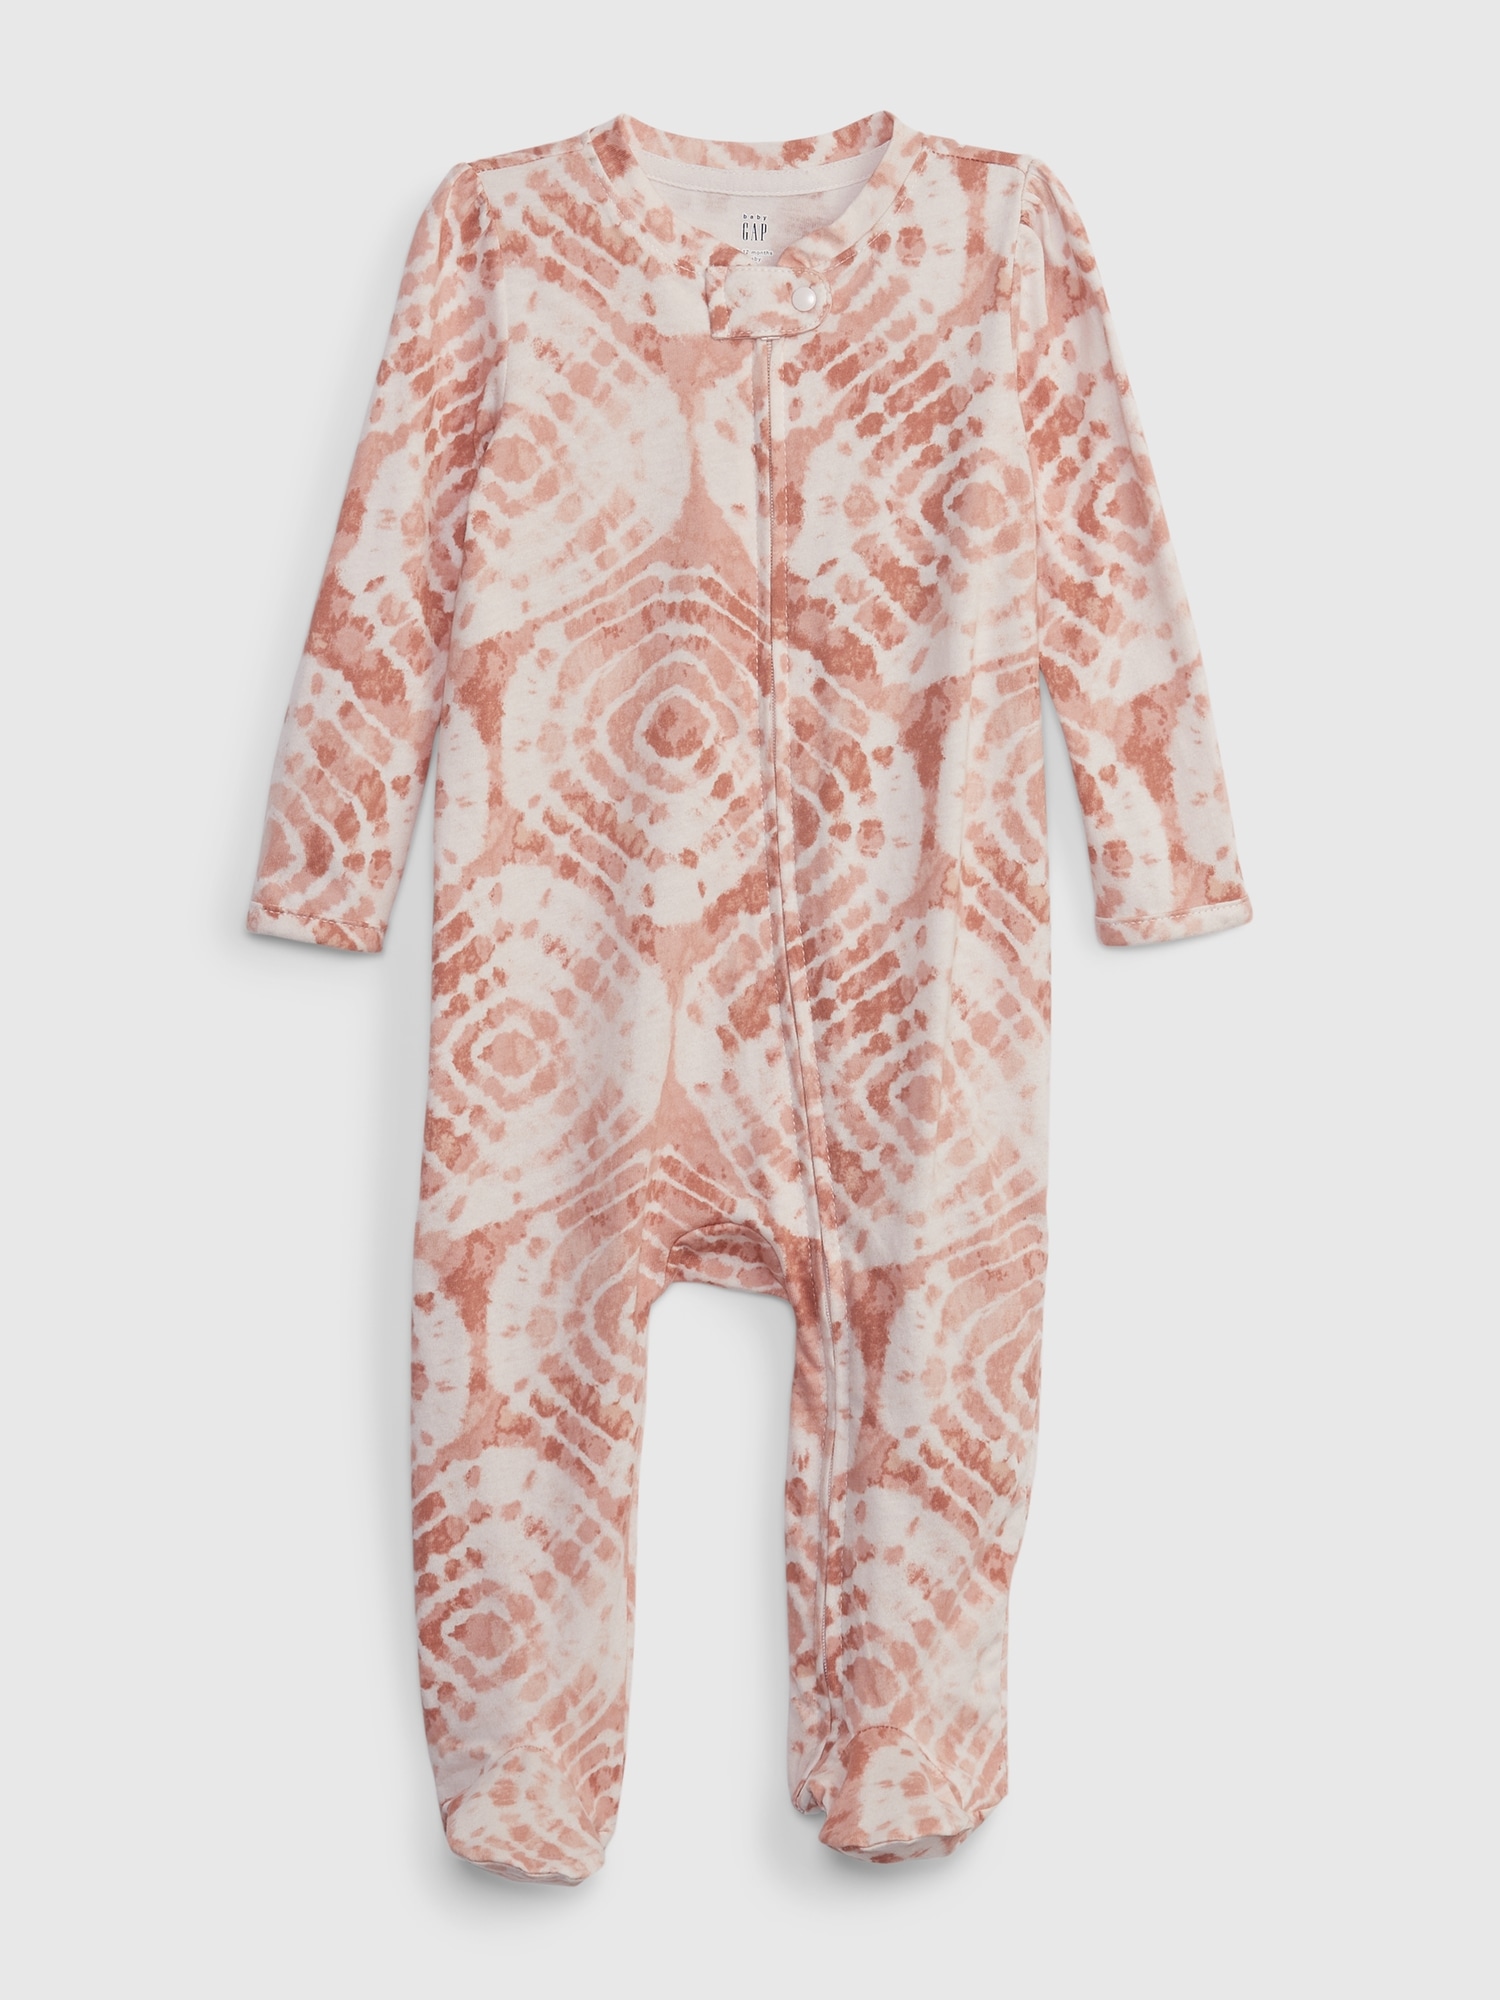 Gap Baby Print Footed One-Piece